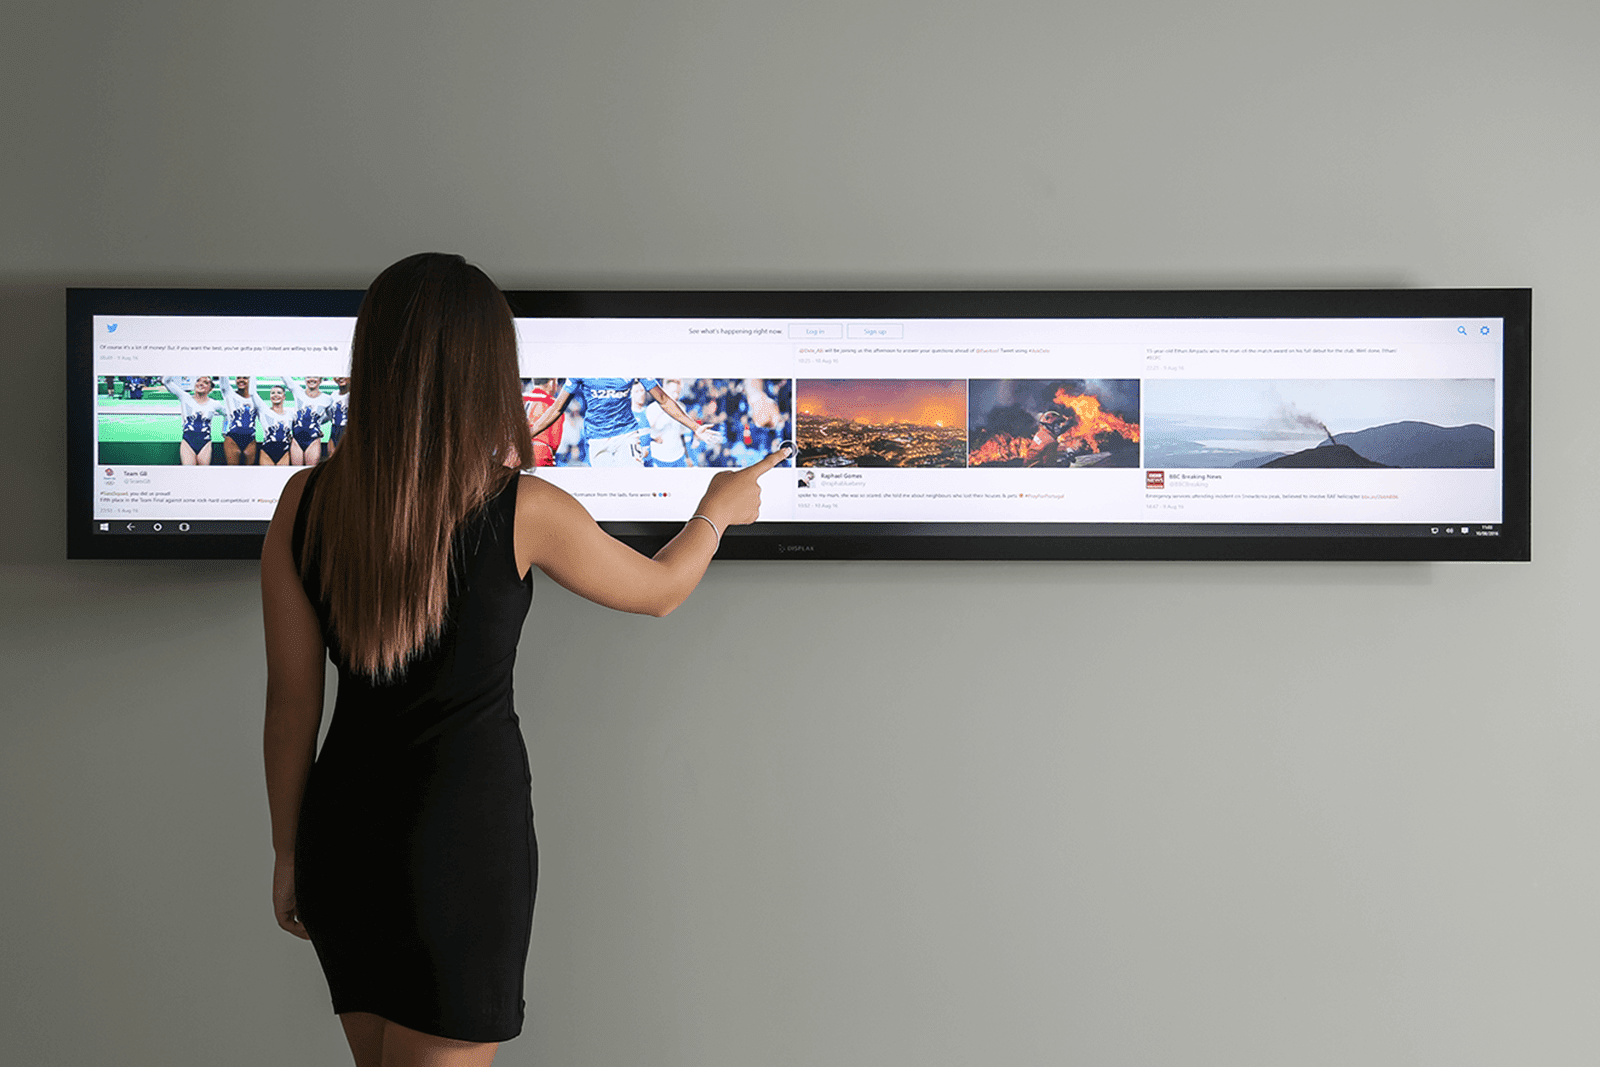 SKIN GLASS has up to 135″ touch active area, which makes it quite flexible for large displays.